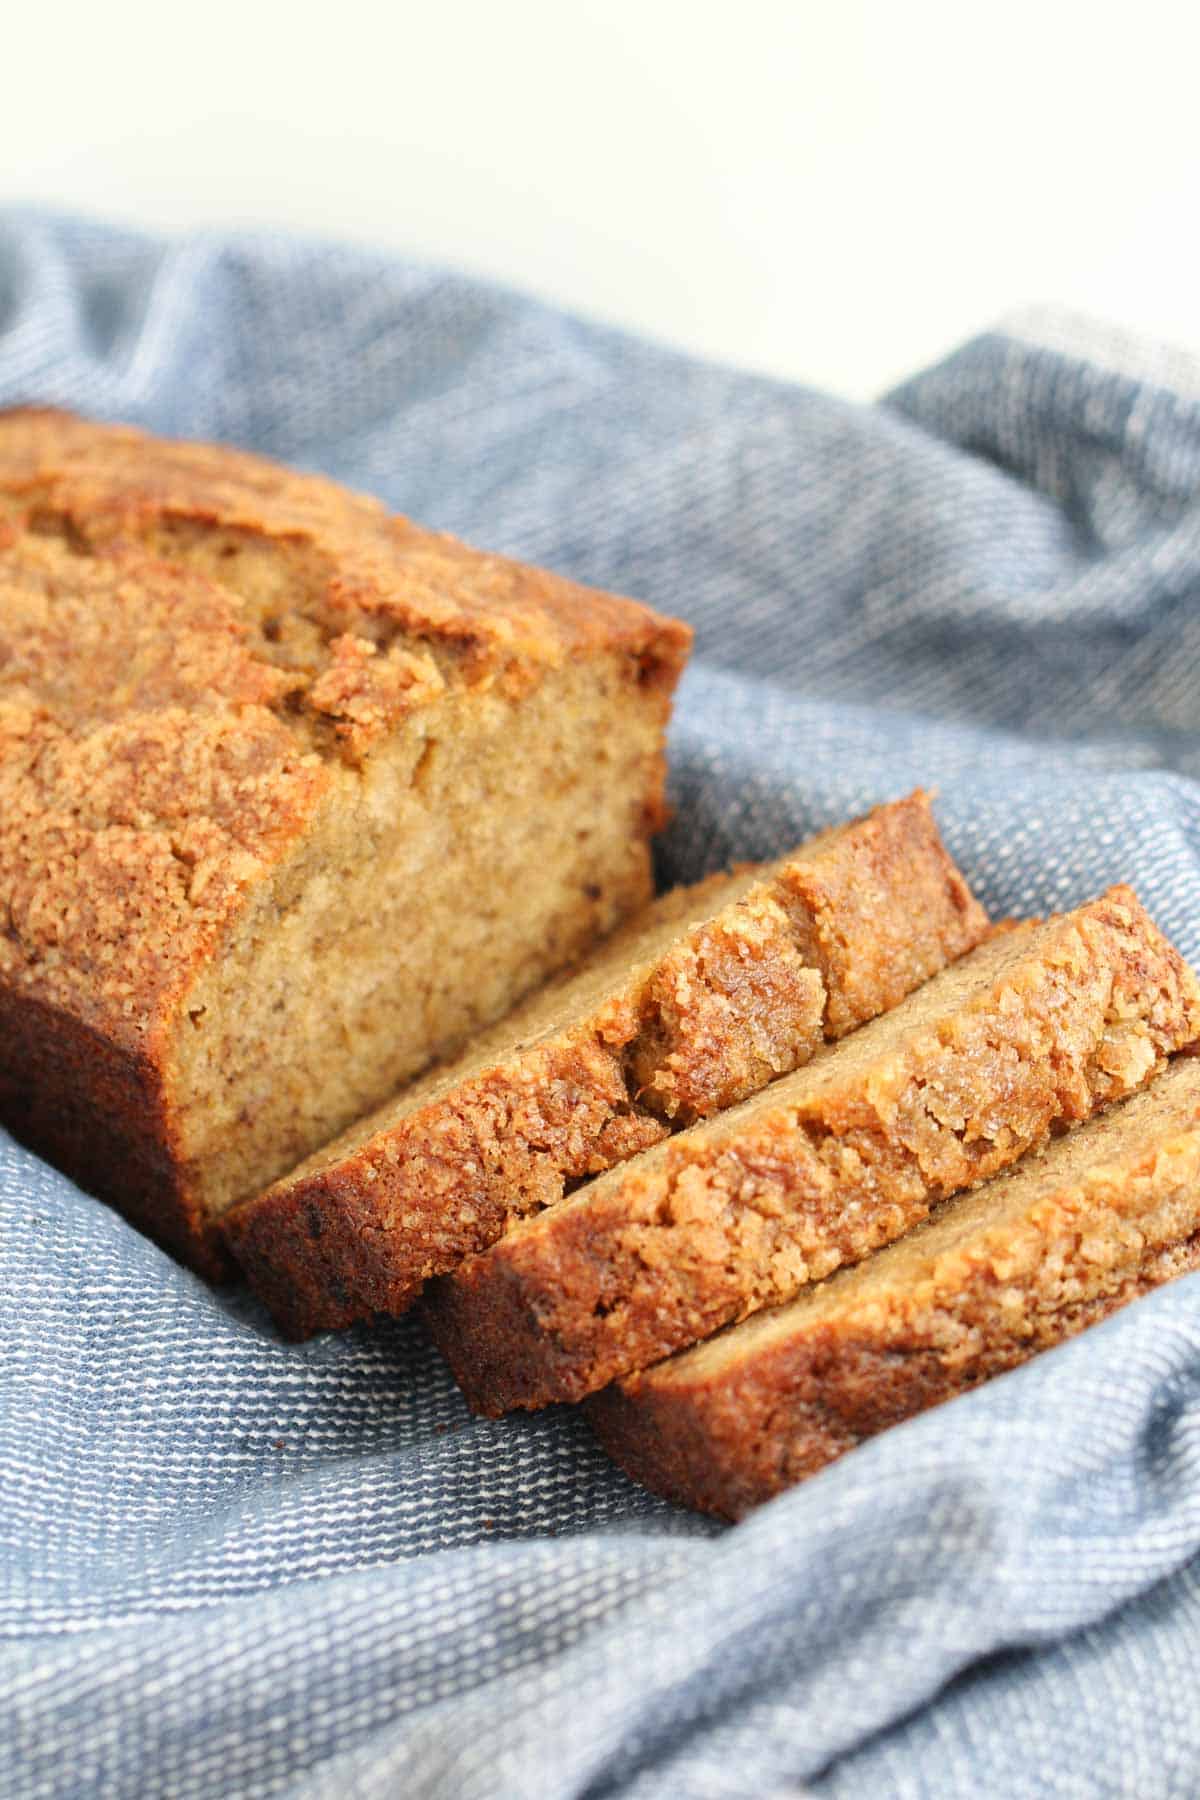 Slices of banana bread with a crunchy sugar topping on a blue tea towel.